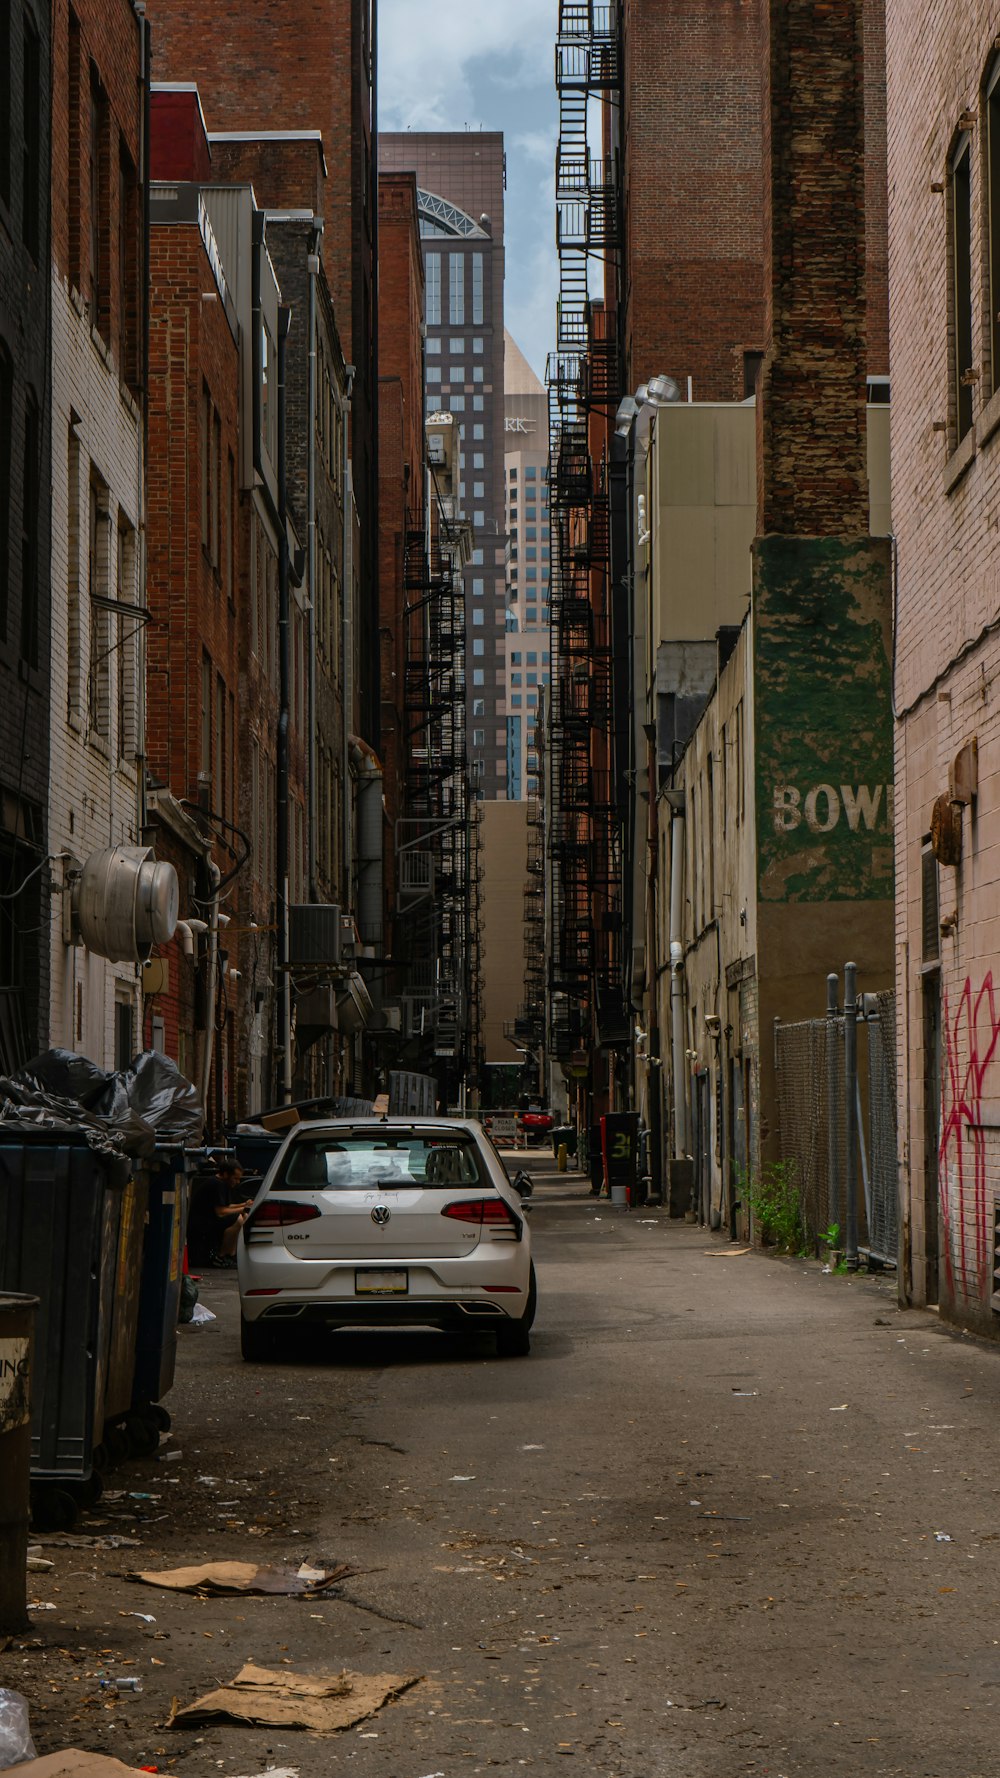 a car parked in a alley between buildings